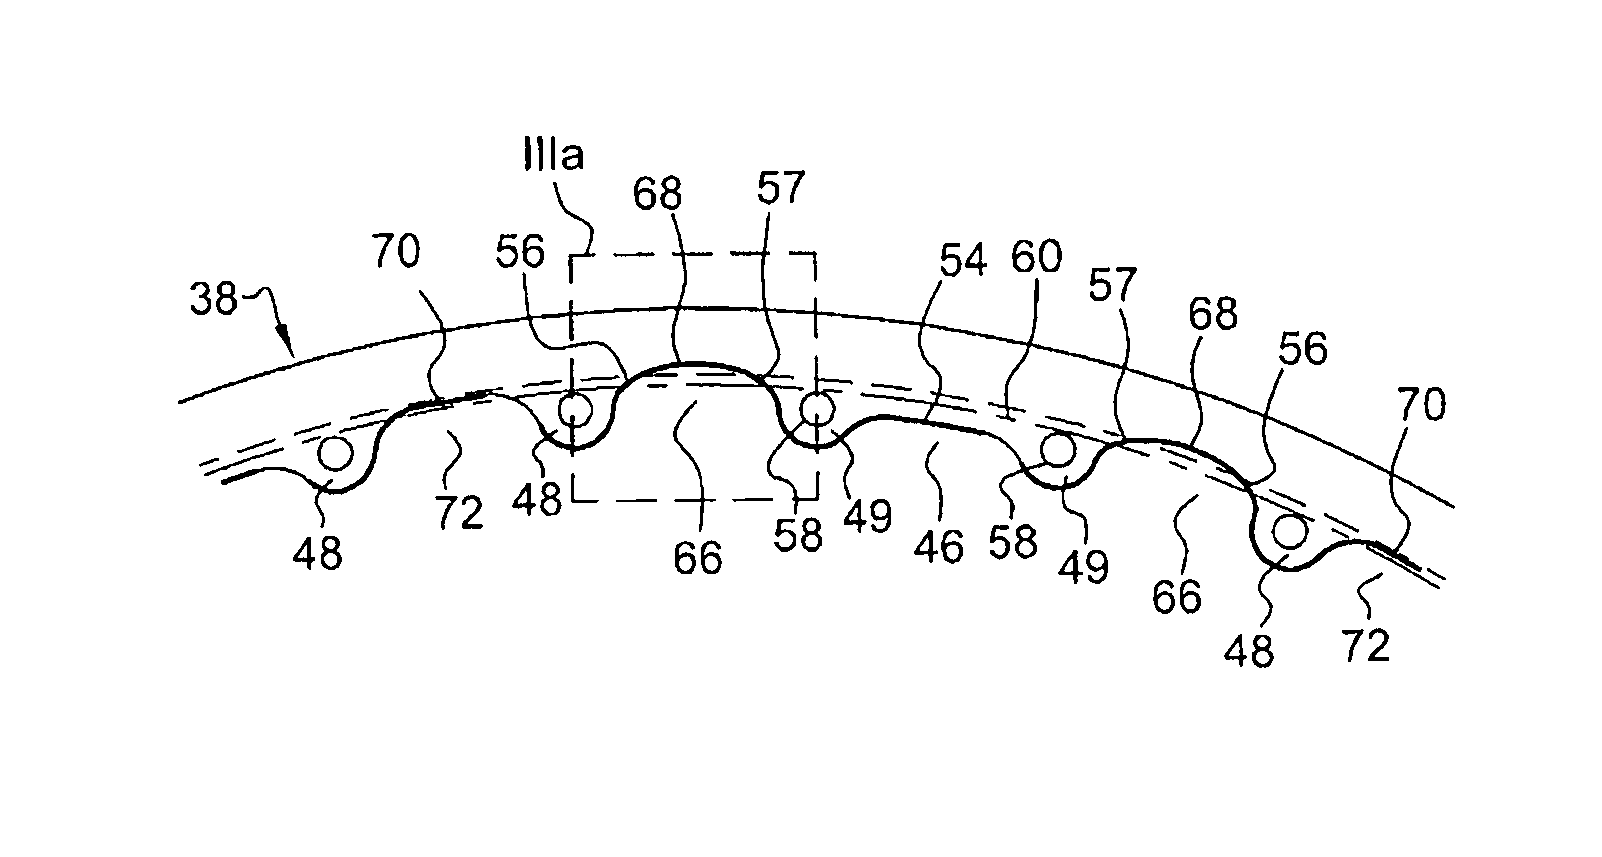 Annular flange for fastening a rotor or stator element in a turbomachine